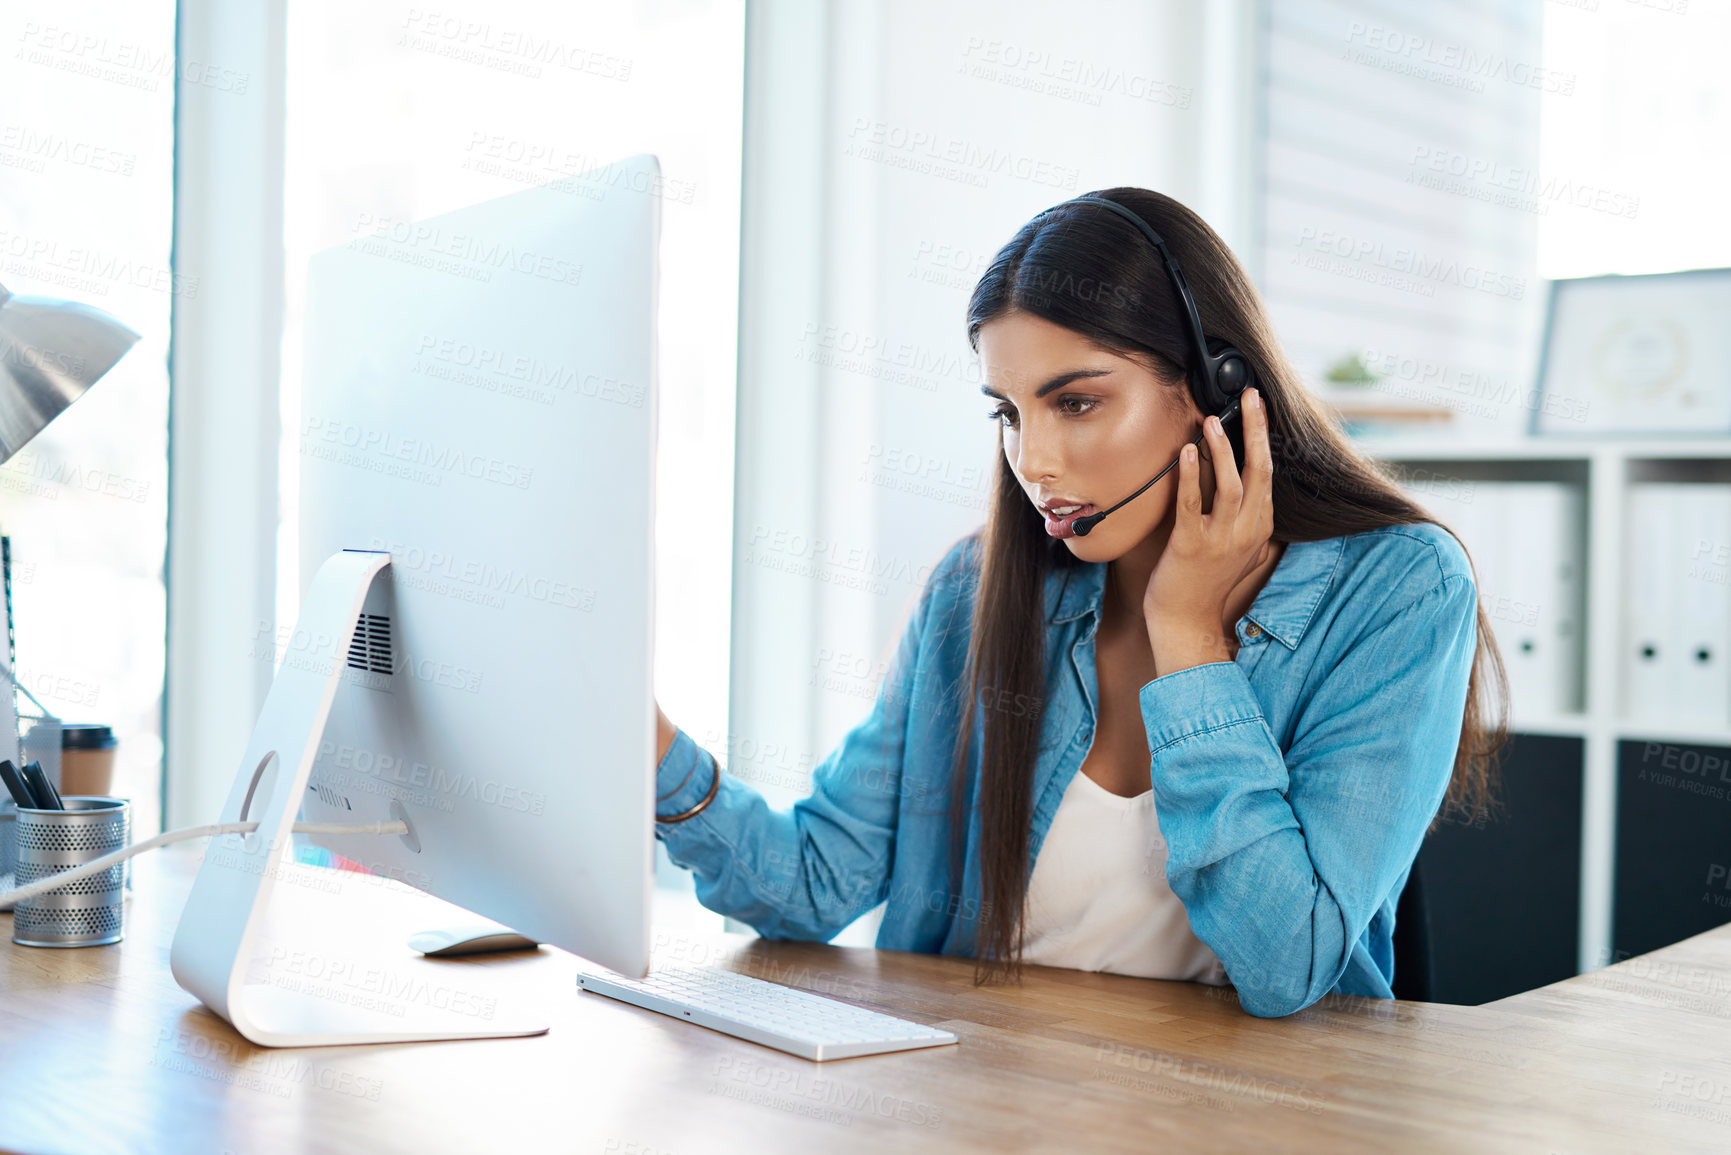 Buy stock photo Shot of a young businesswoman wearing a headset while working on a computer in an office